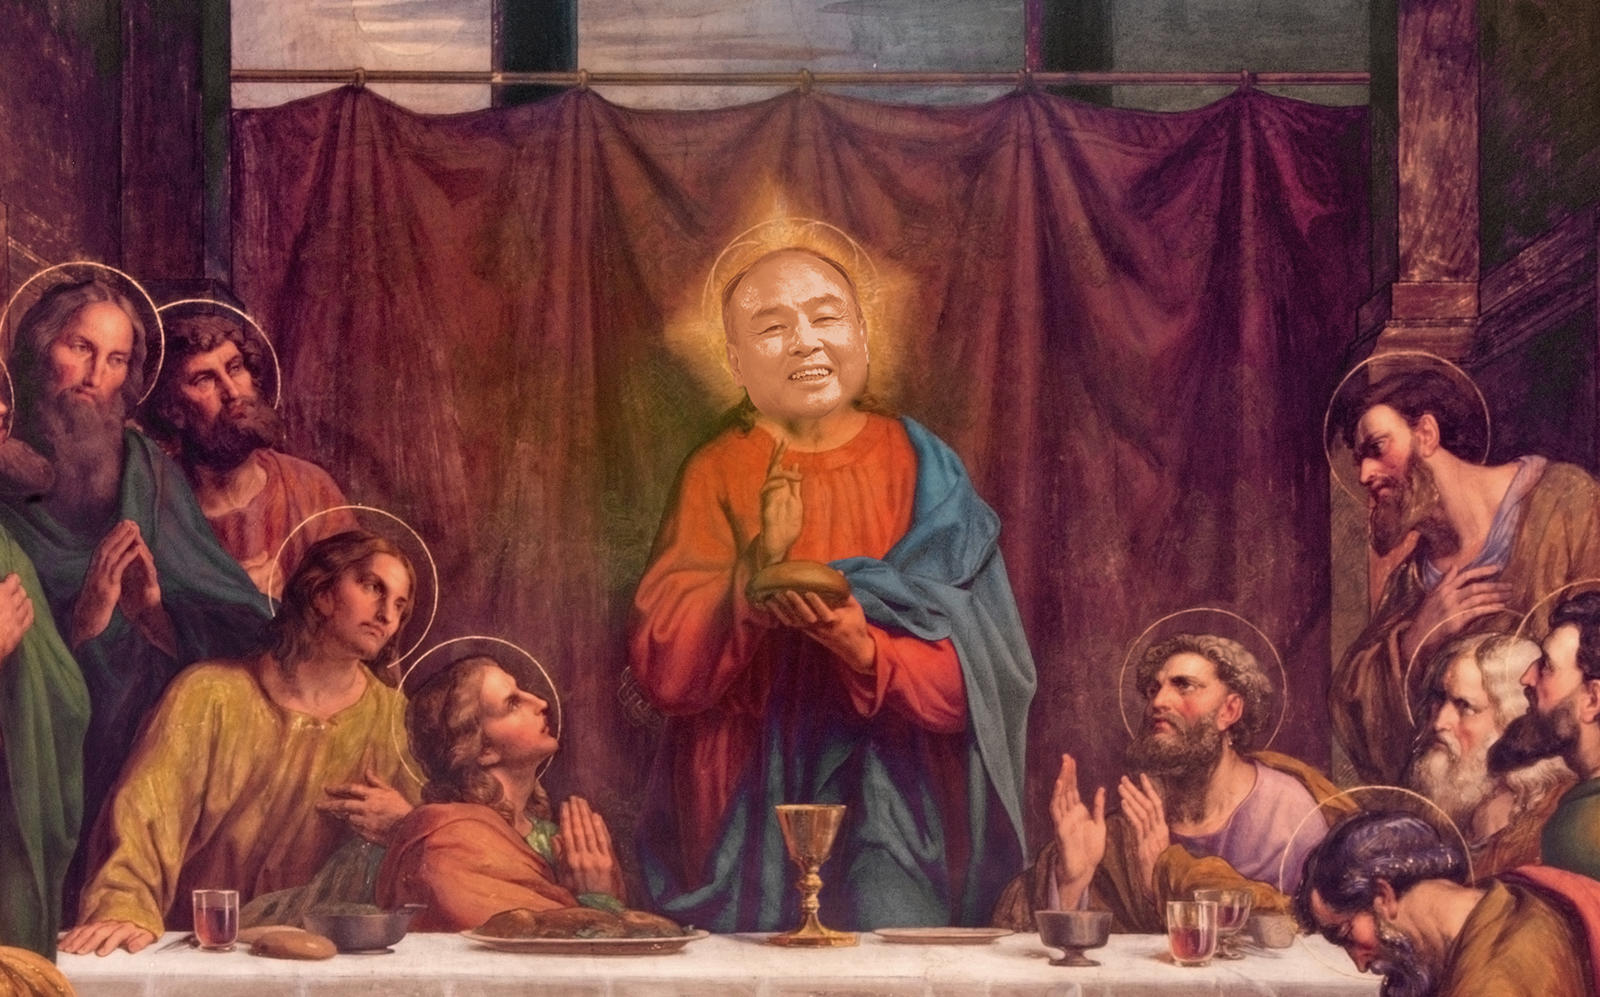 Photo illustration of Softbank CEO Masayoshi Son in The Last Supper (Illustration by The Real Deal)